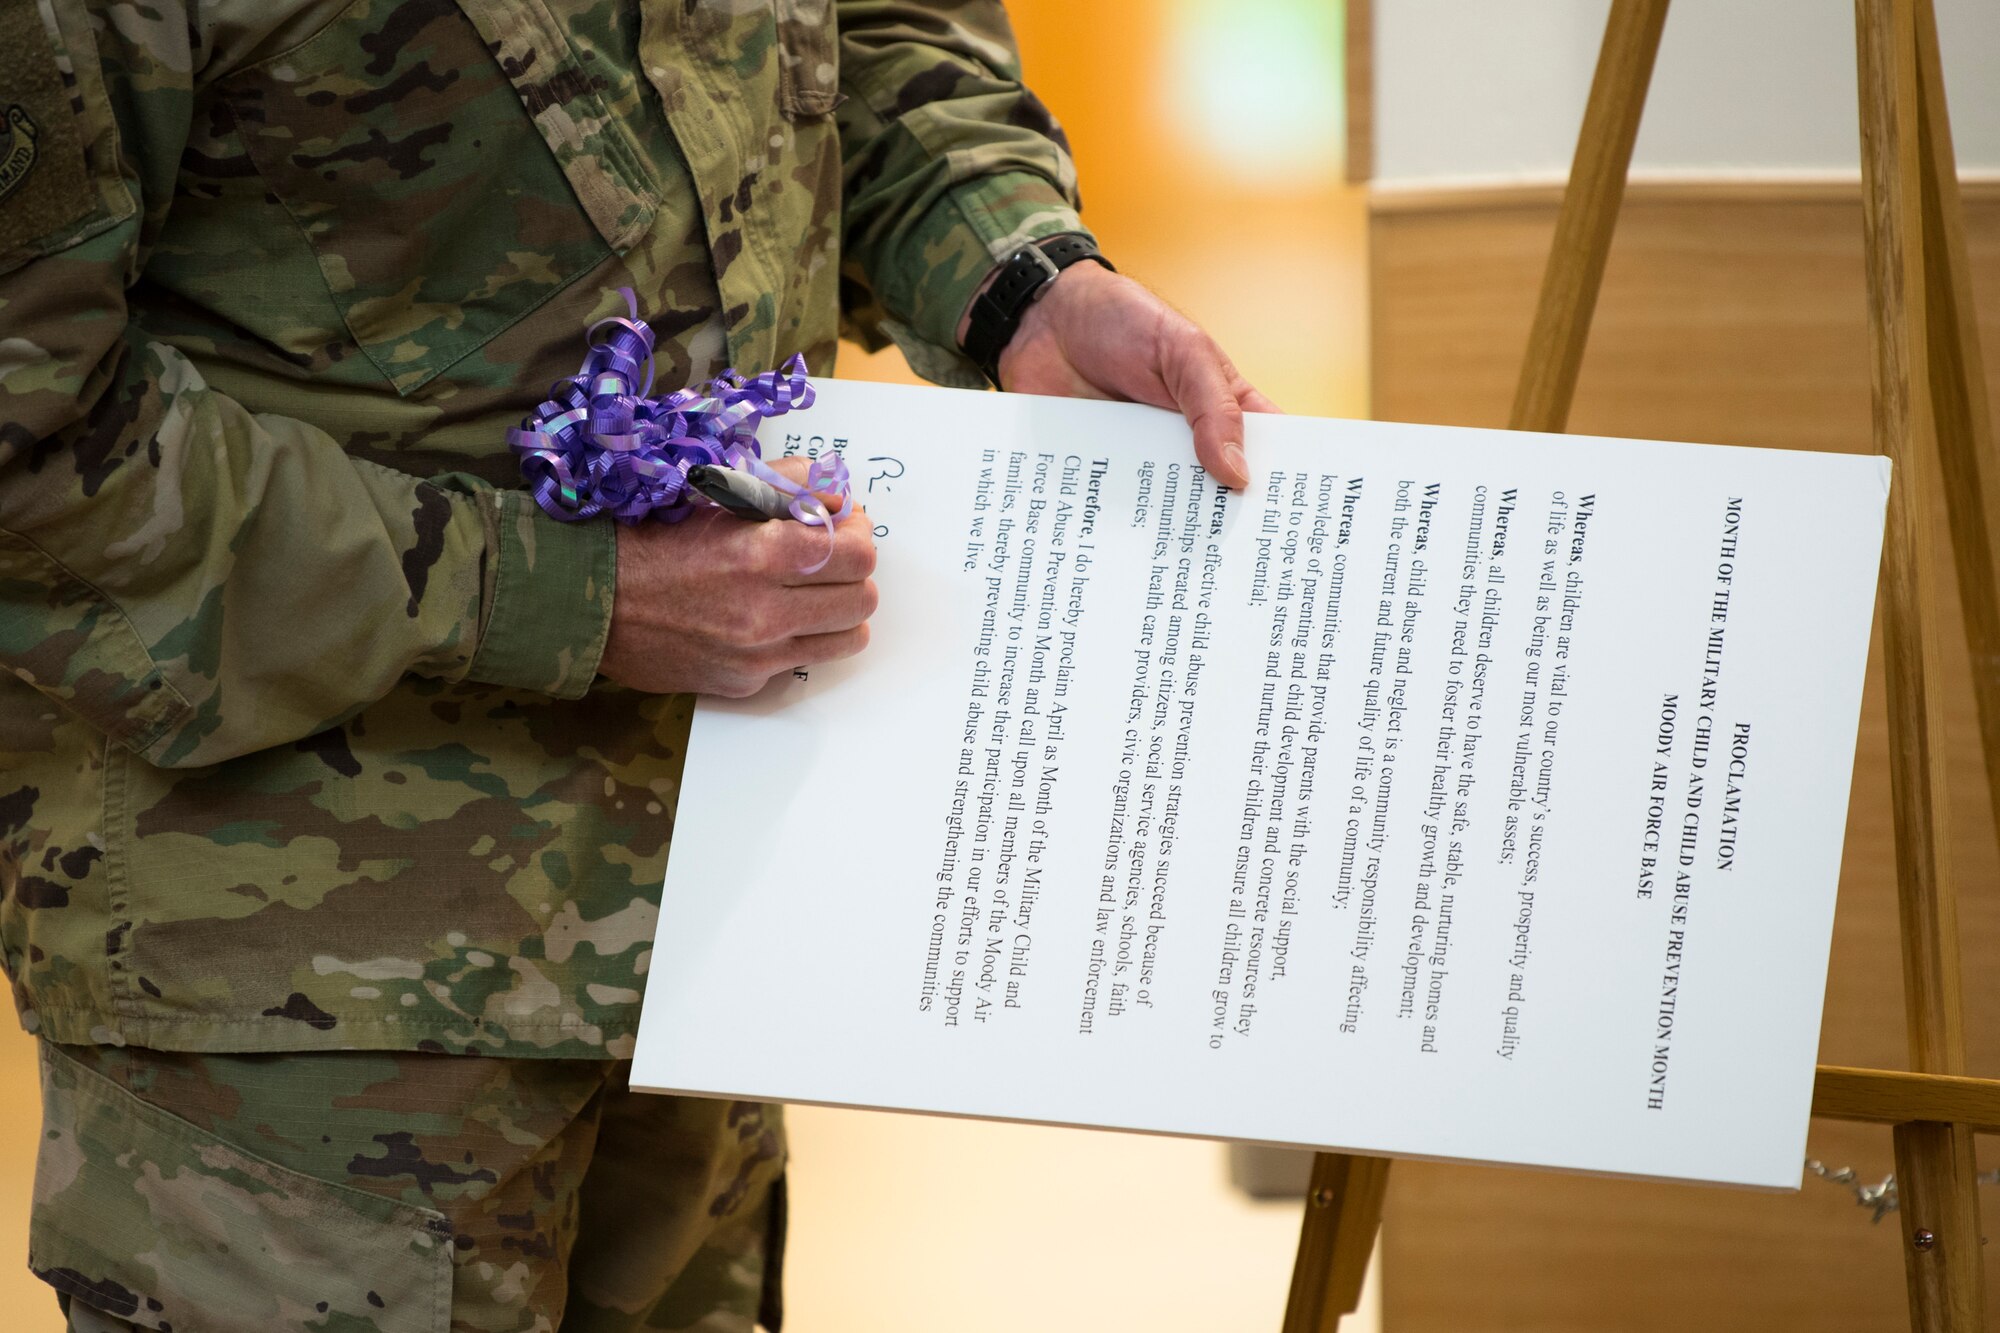 Col. Brian Stumpe, 23d Mission Support Group commander, signs a proclamation against child abuse, April 5, 2019, at Moody Air Force Base, Ga. April is designated as Month of the Military Child. The proclamation is designed to increase military members' participation in raising awareness of child abuse, preventing child abuse and strengthening the local community. (U.S. Air Force photo by Airman 1st Class Taryn Butler)